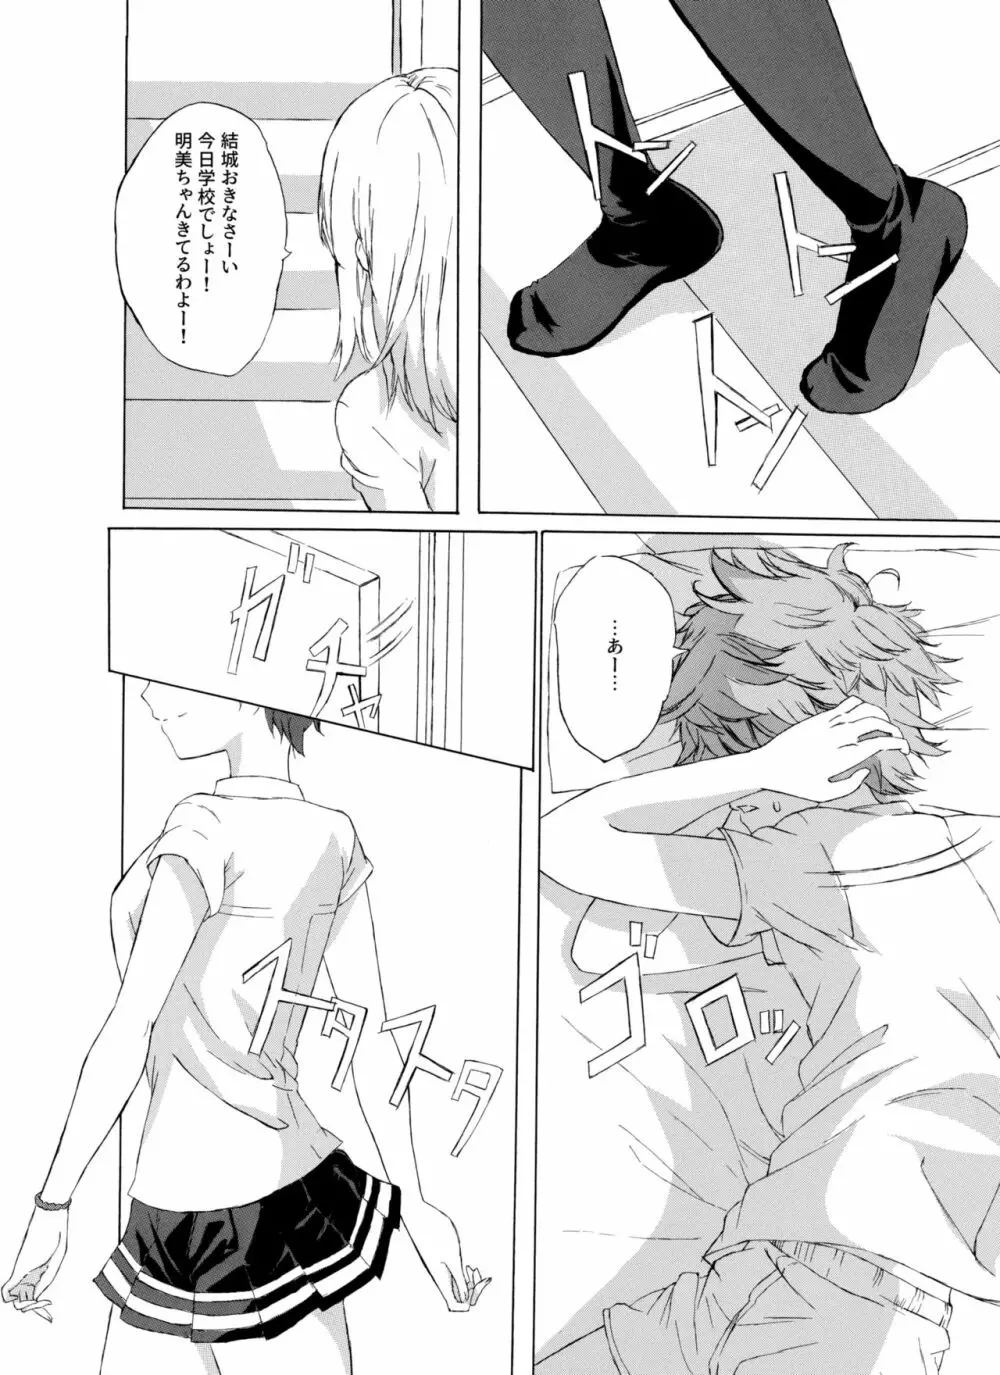 Alive or Explosion 第一話 「序章」 Page.5